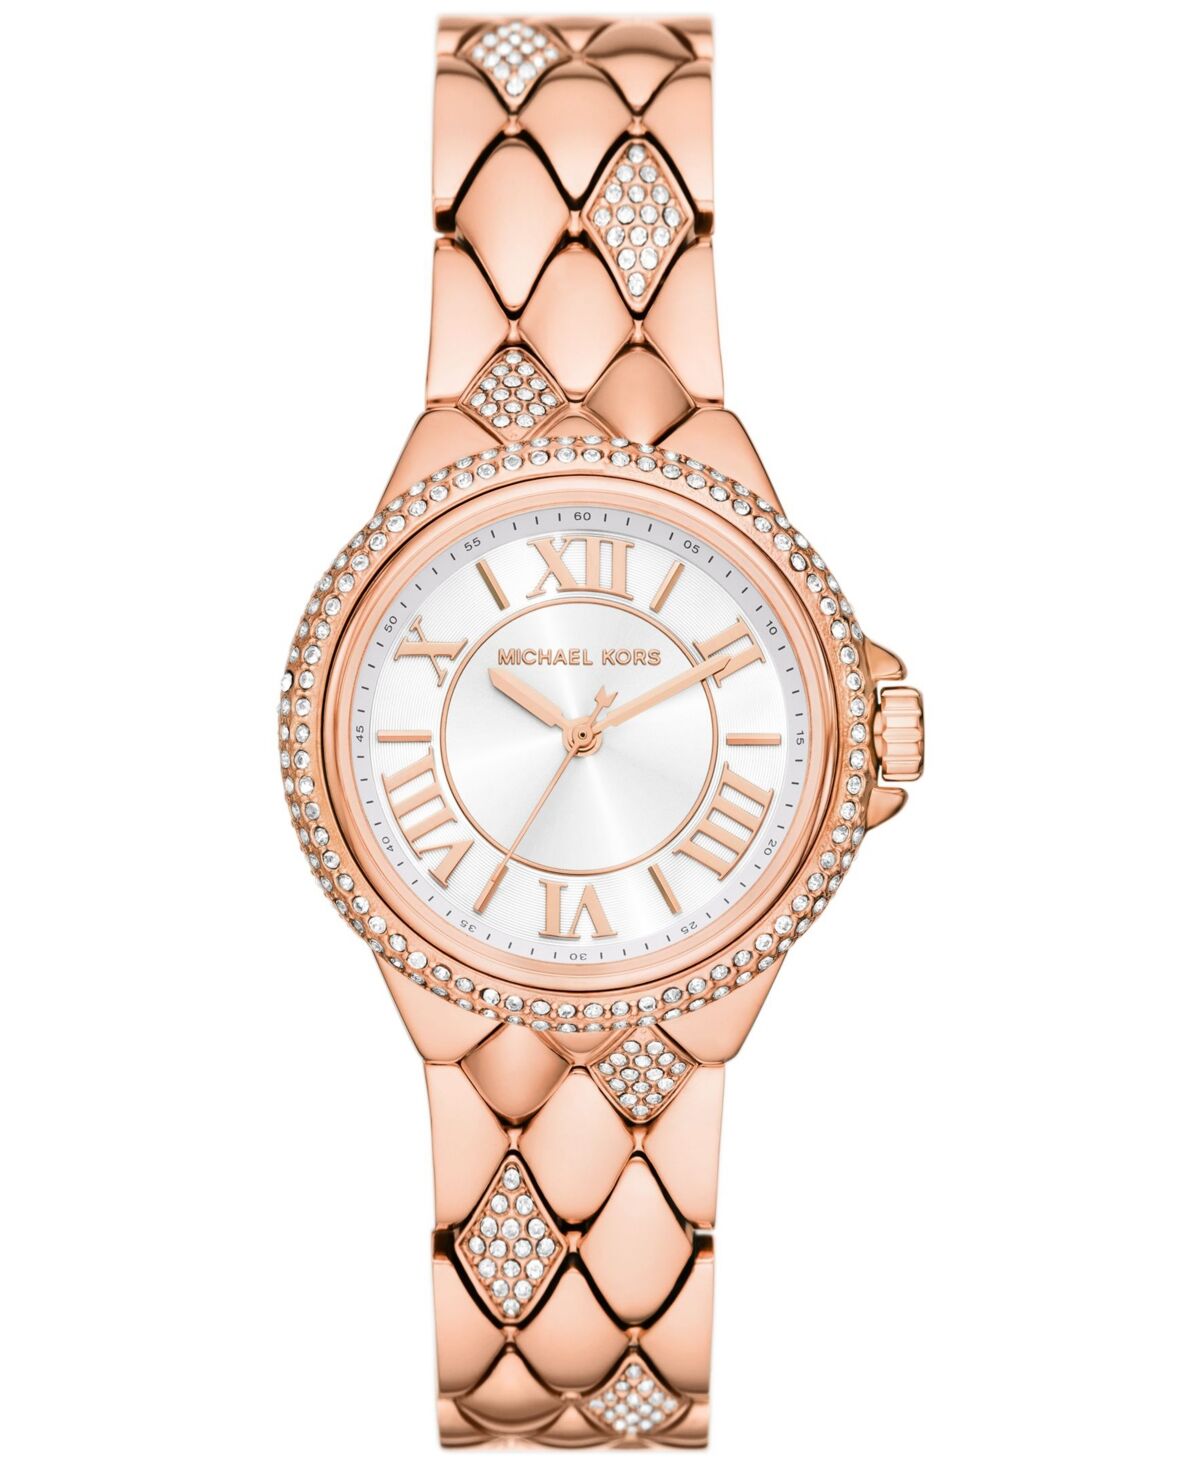 Michael Kors Women's Camille Three-Hand Rose Gold-Tone Stainless Steel Watch 33mm - Rose Gold-Tone